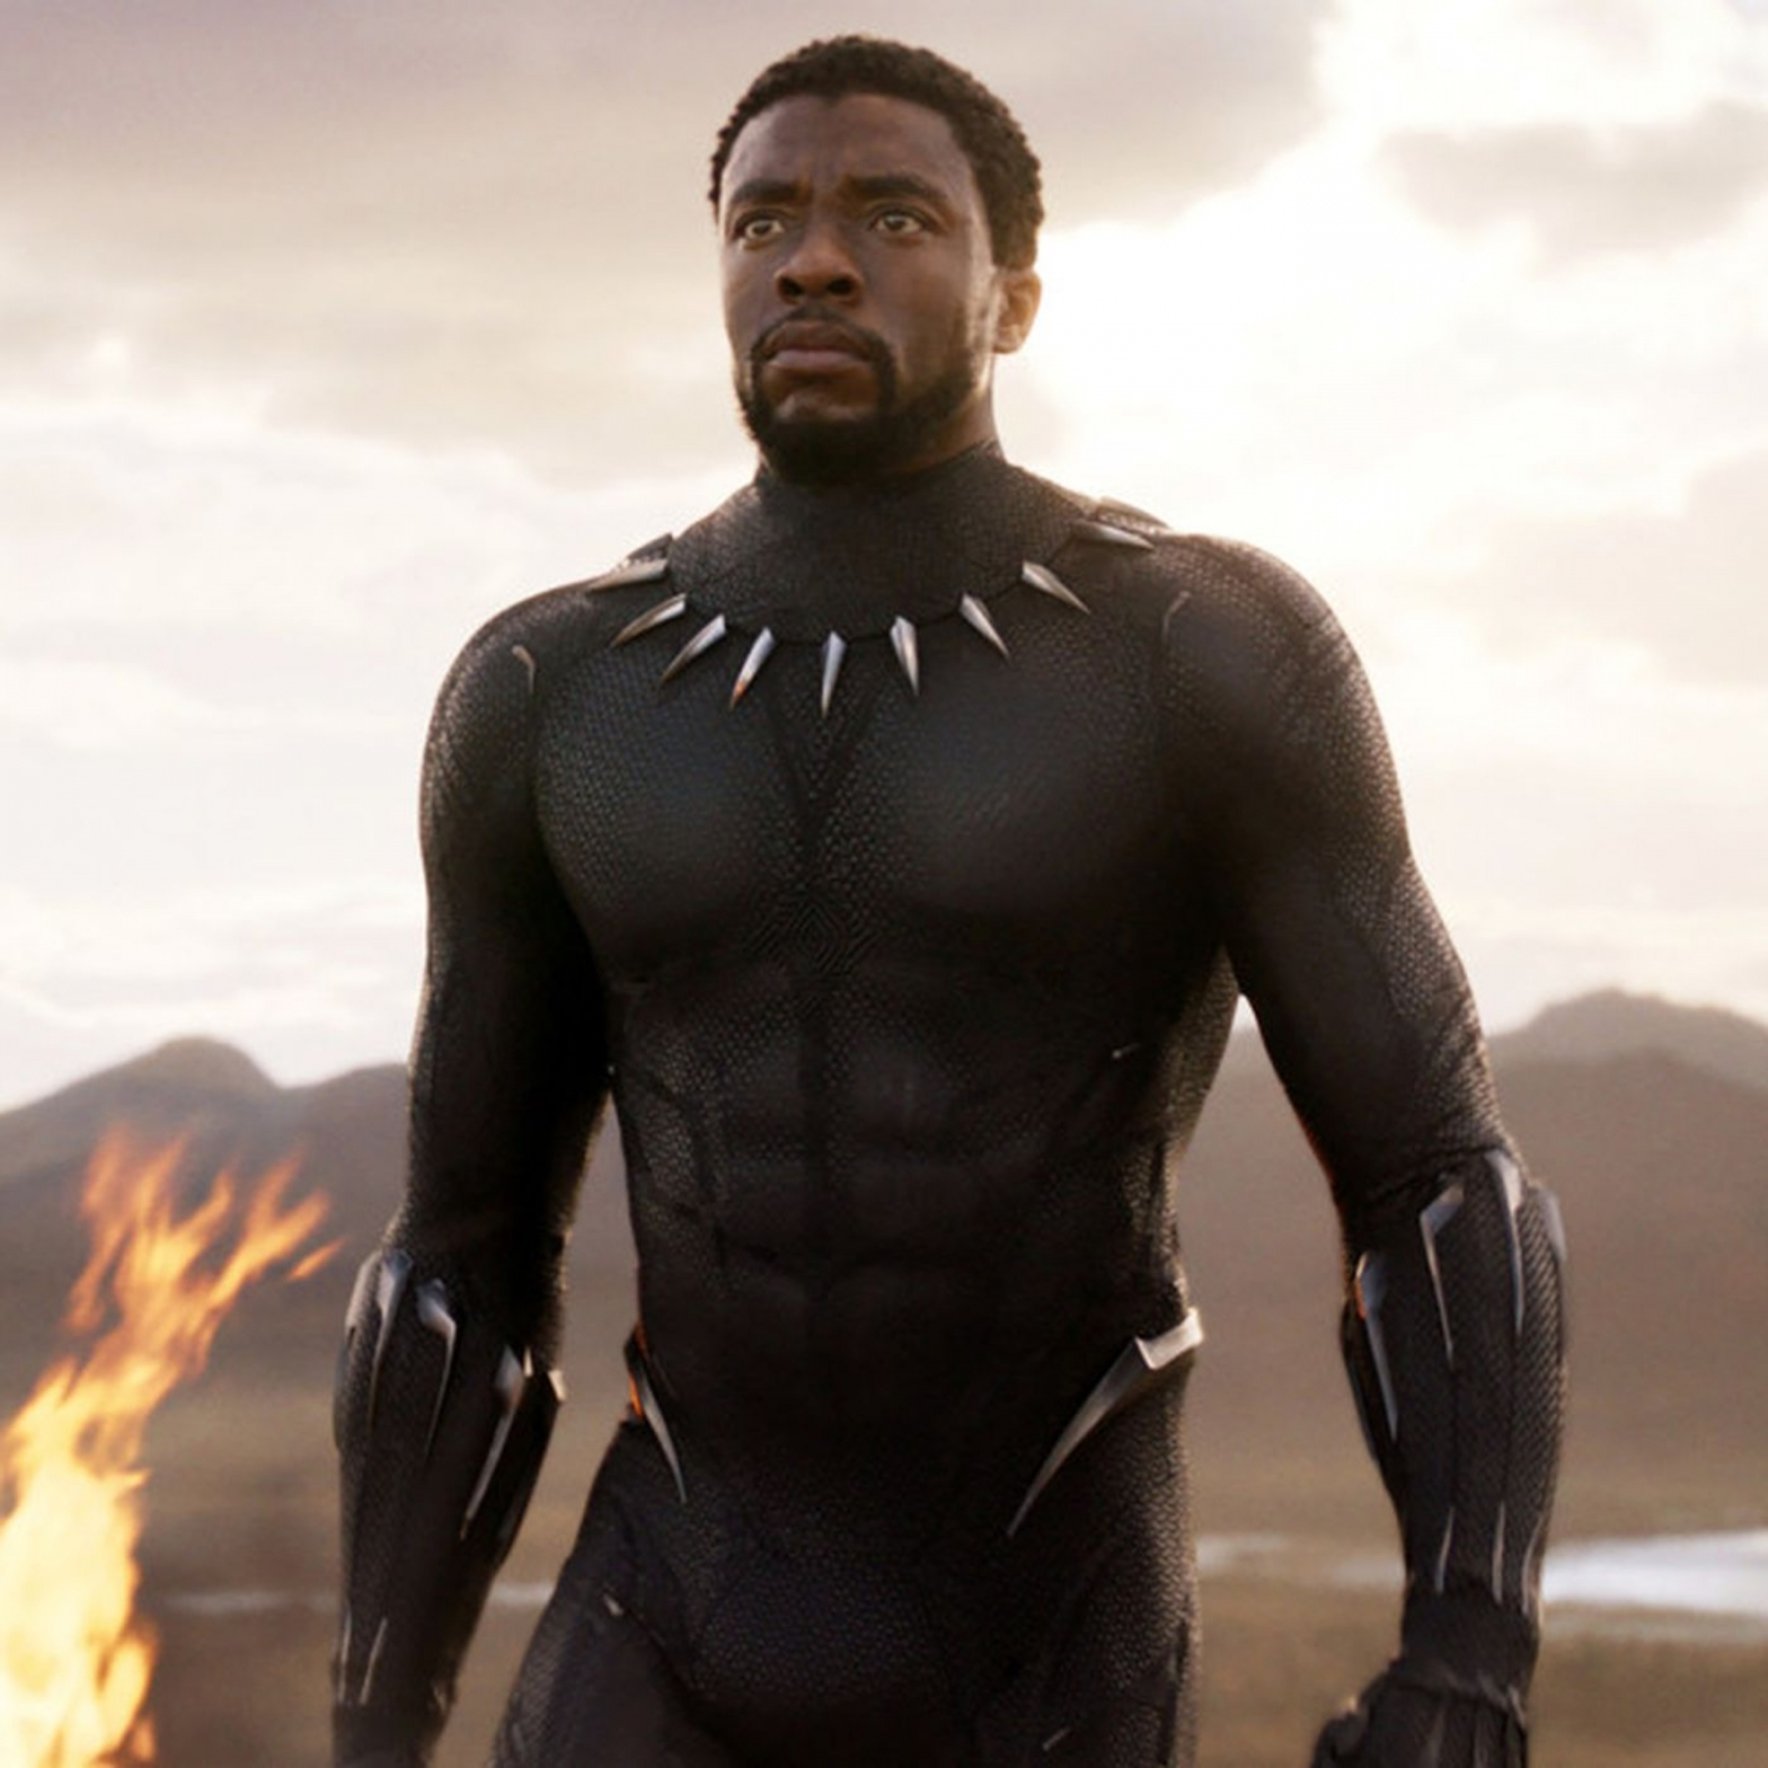 Black Panther: Wakanda Forever Producer Talks About The ‘Pressure’ Of Honoring Chadwick Boseman